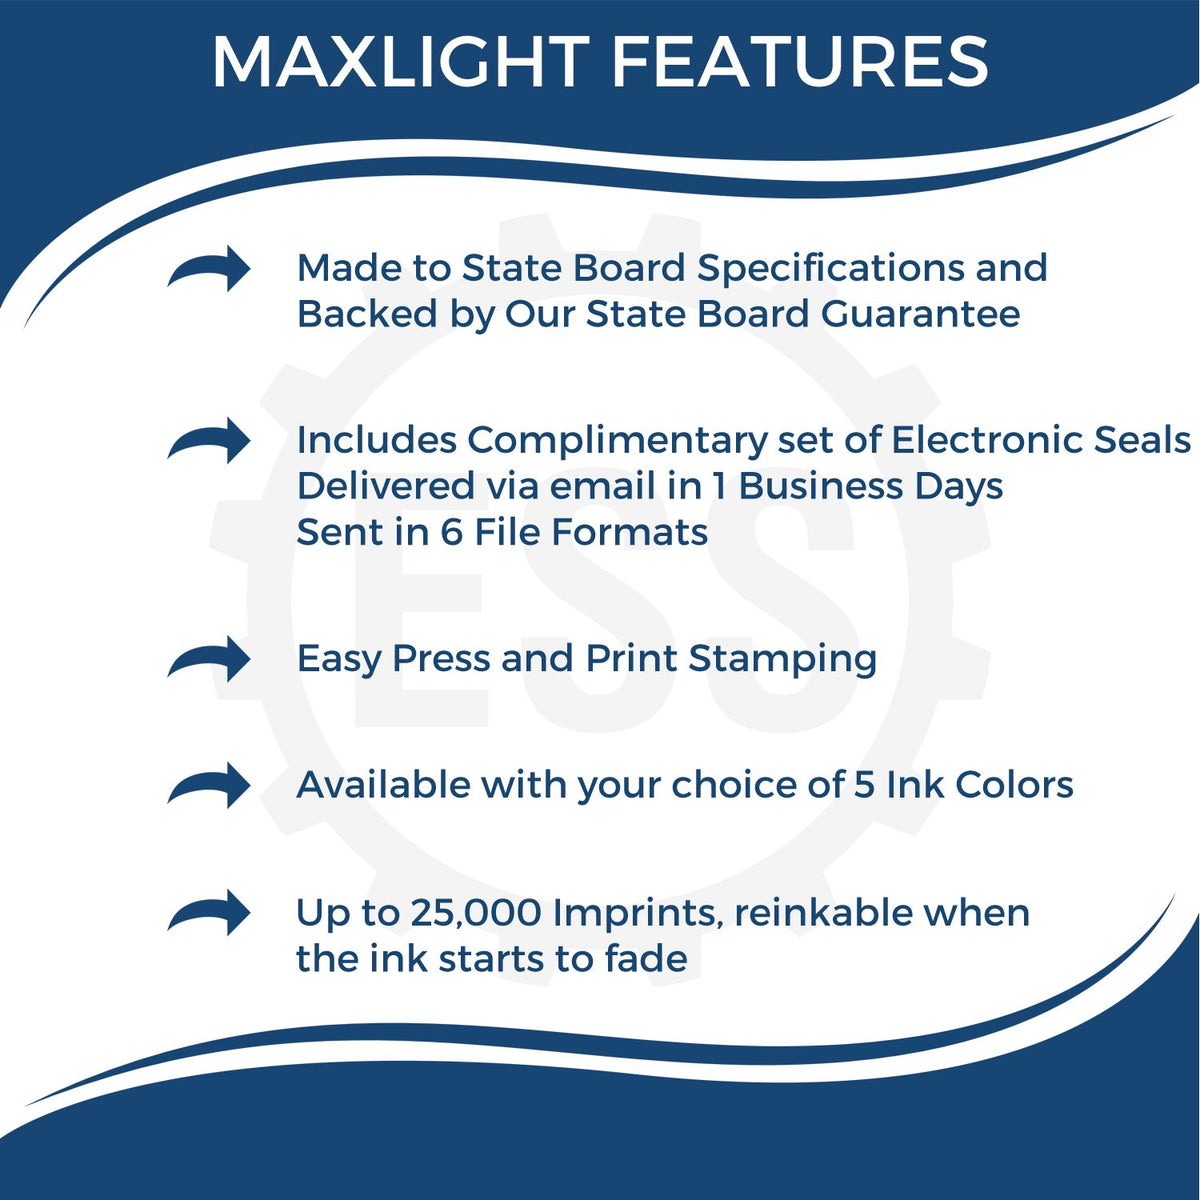 A picture of an infographic highlighting the selling points for the Premium MaxLight Pre-Inked South Dakota Geology Stamp